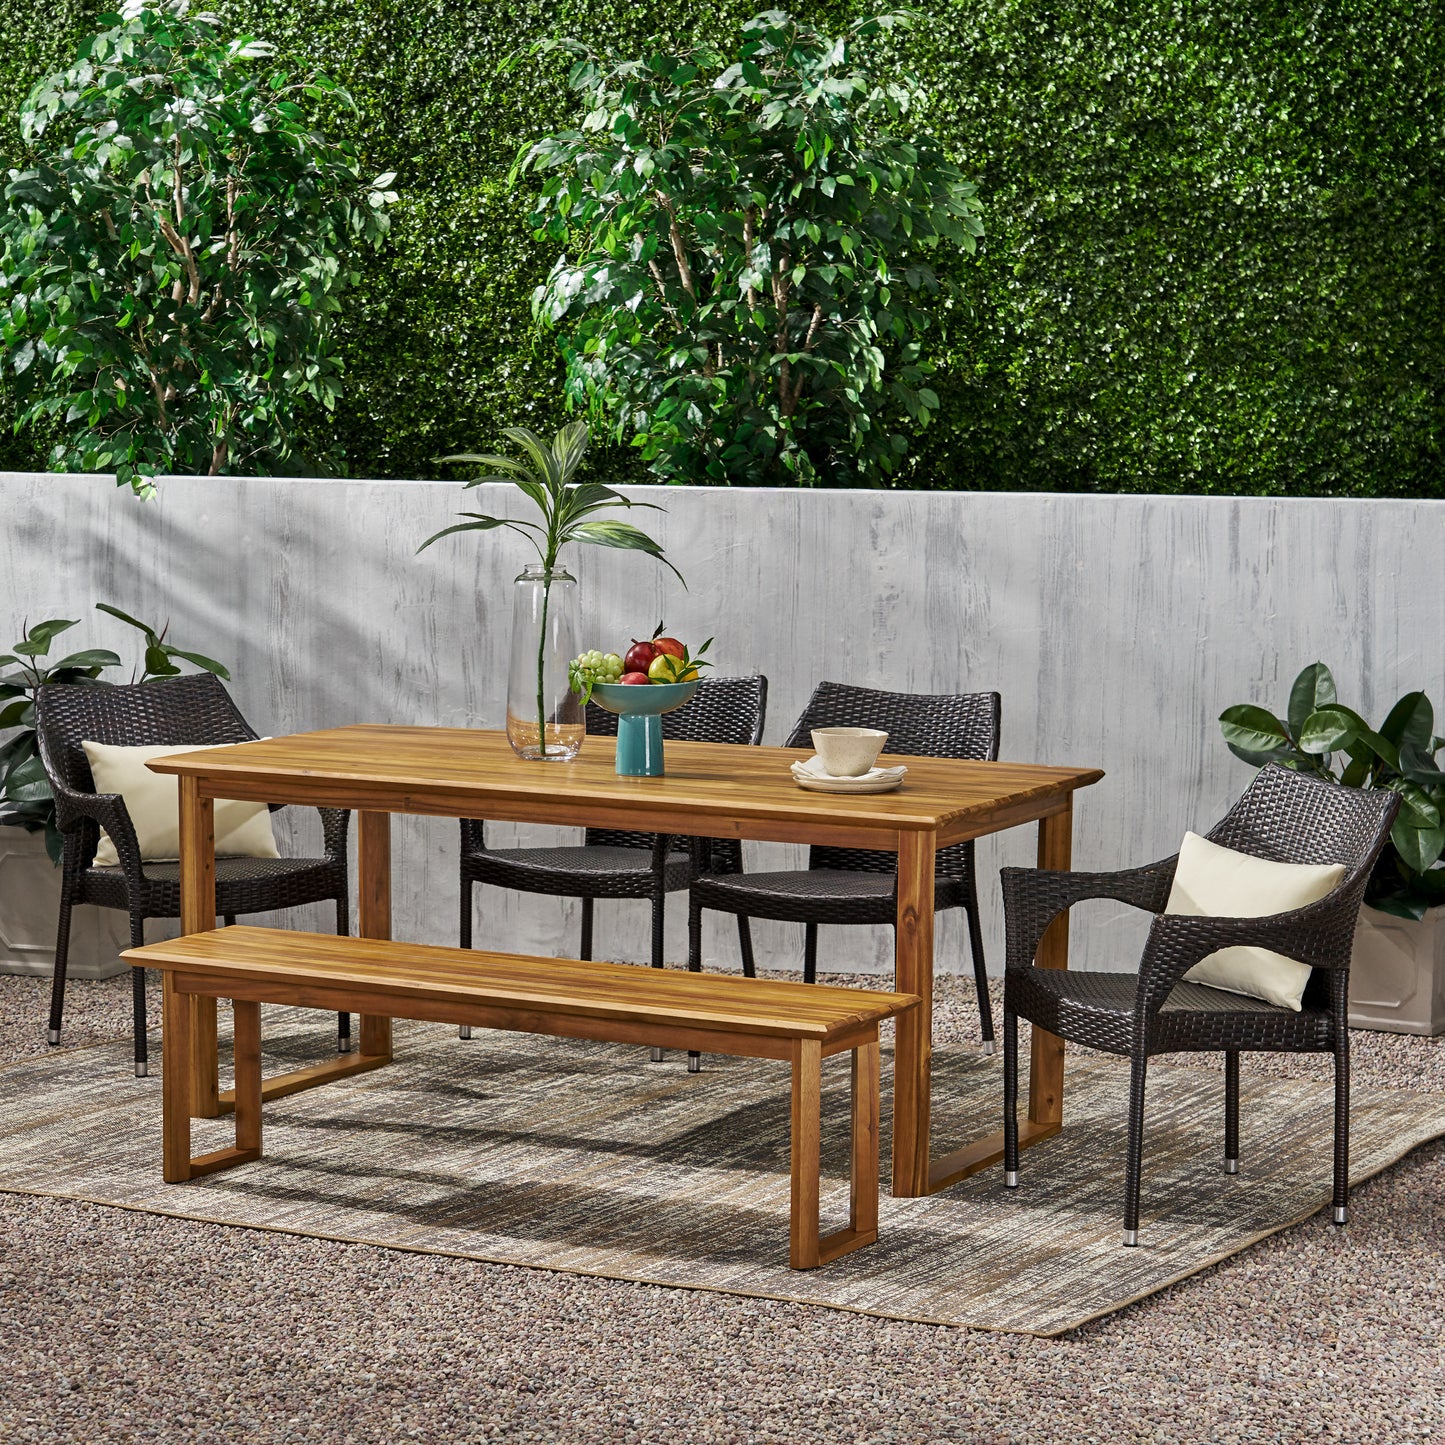 Ellendale Outdoor Acacia Wood and Wicker 6 Piece Dining Set with Bench